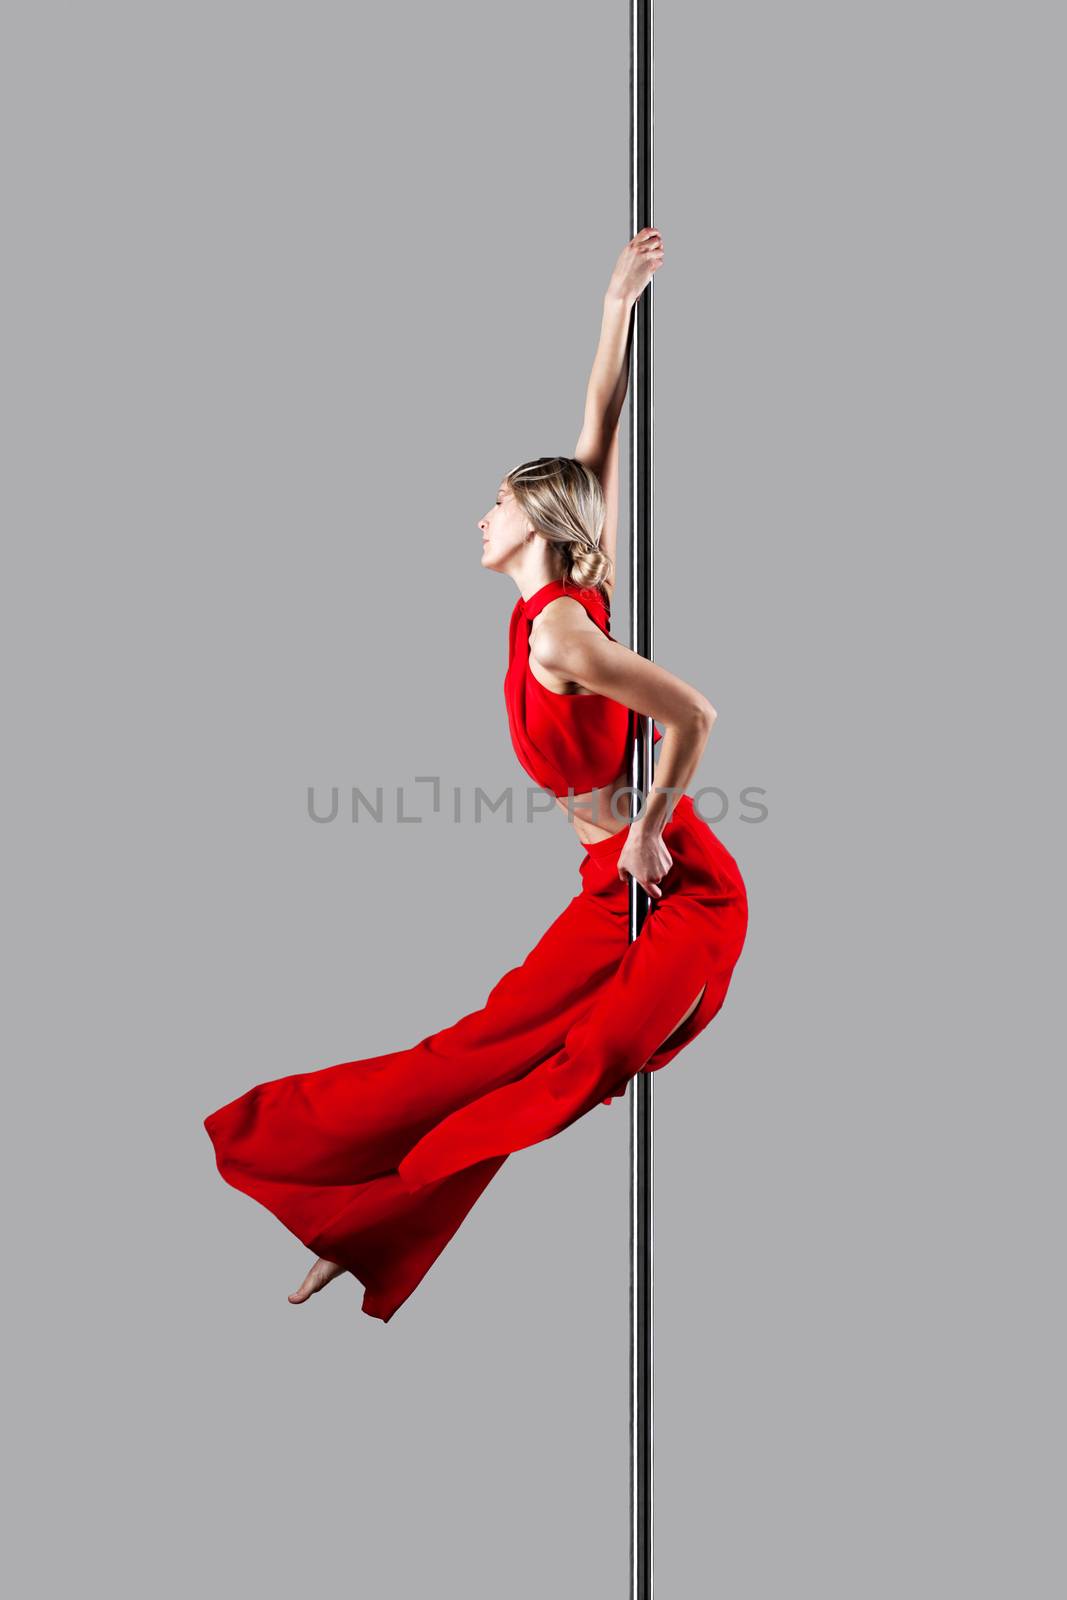 pole dance girl in elegant red outfit posing against gray background